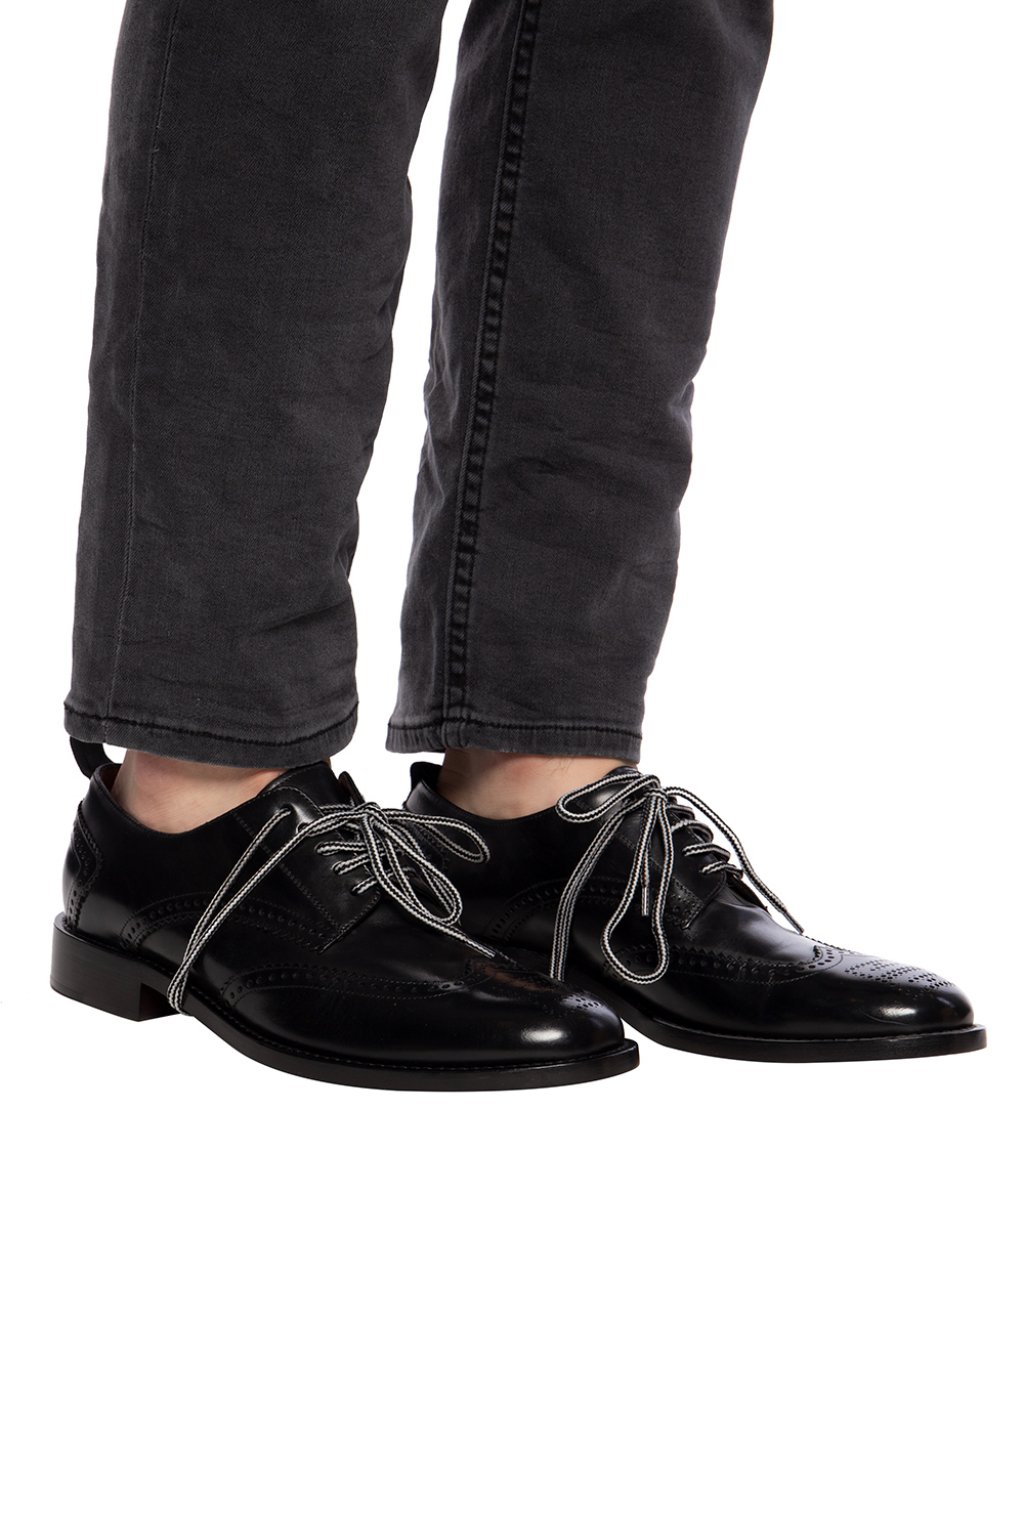 givenchy derby shoes